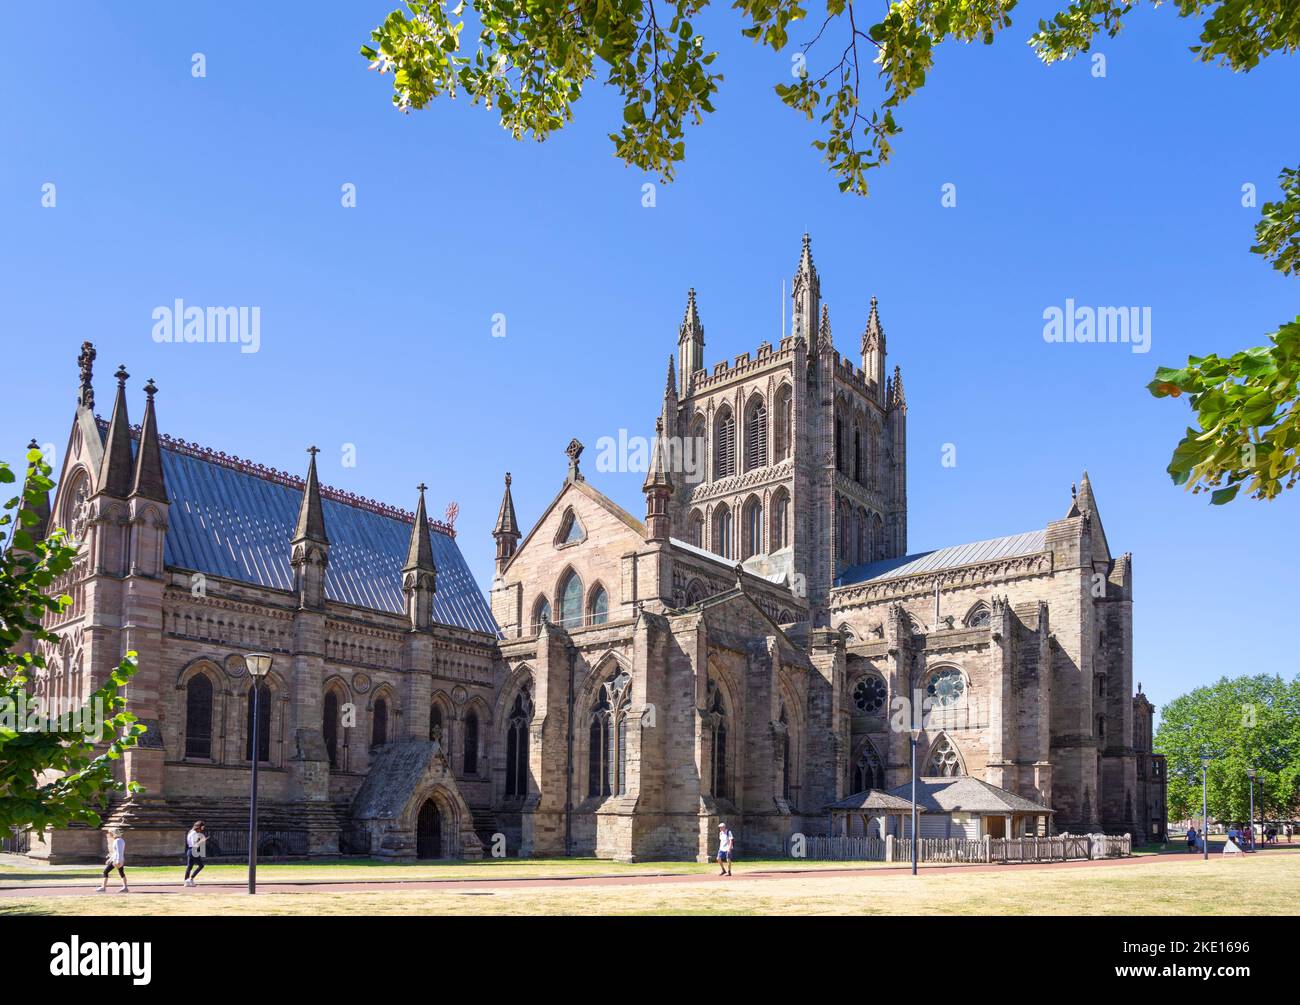 Hereford Cathedral Hereford Cathedral of Saint Mary the Virgin and Saint Ethelbert the King Hereford Herefordshire England GB Europa Stockfoto